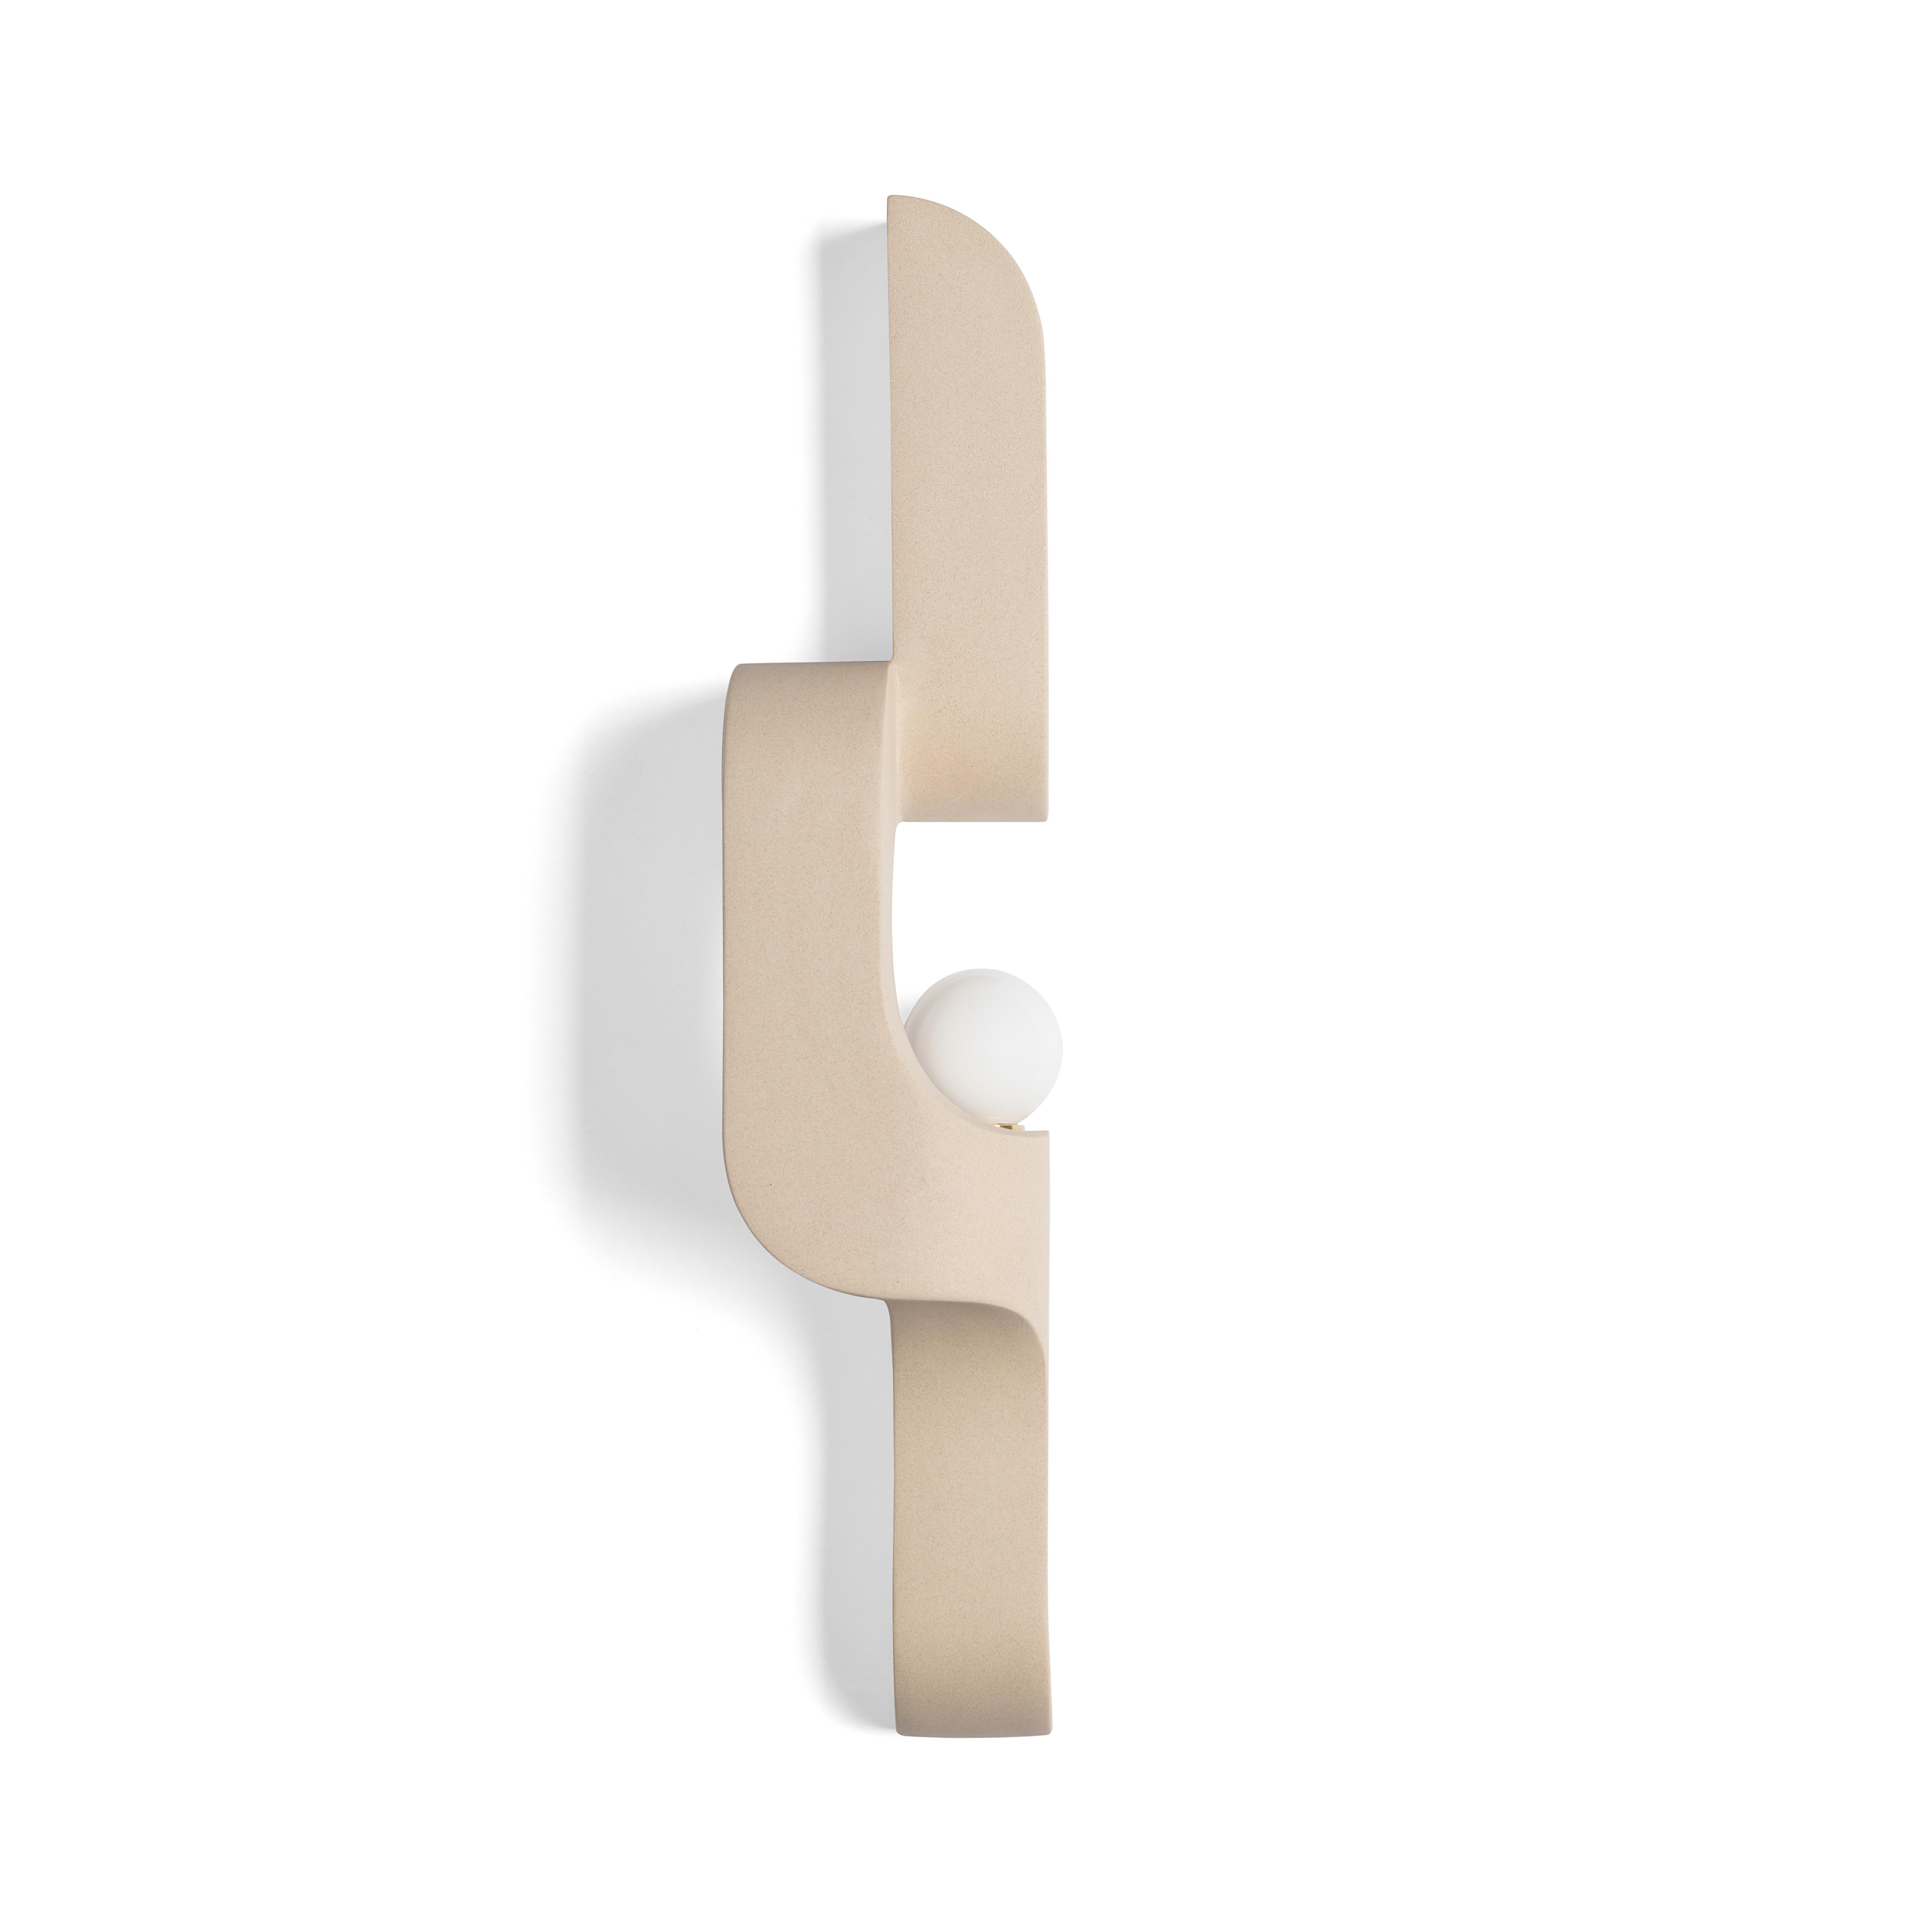 In this ceramic wall sconce, generous curves are paired with crisp edges and the repetition of geometry to create a flow. The sconce snakes up and off the wall, a sculptural lighting piece that's understated, and almost artifact-like.  Serpentine is